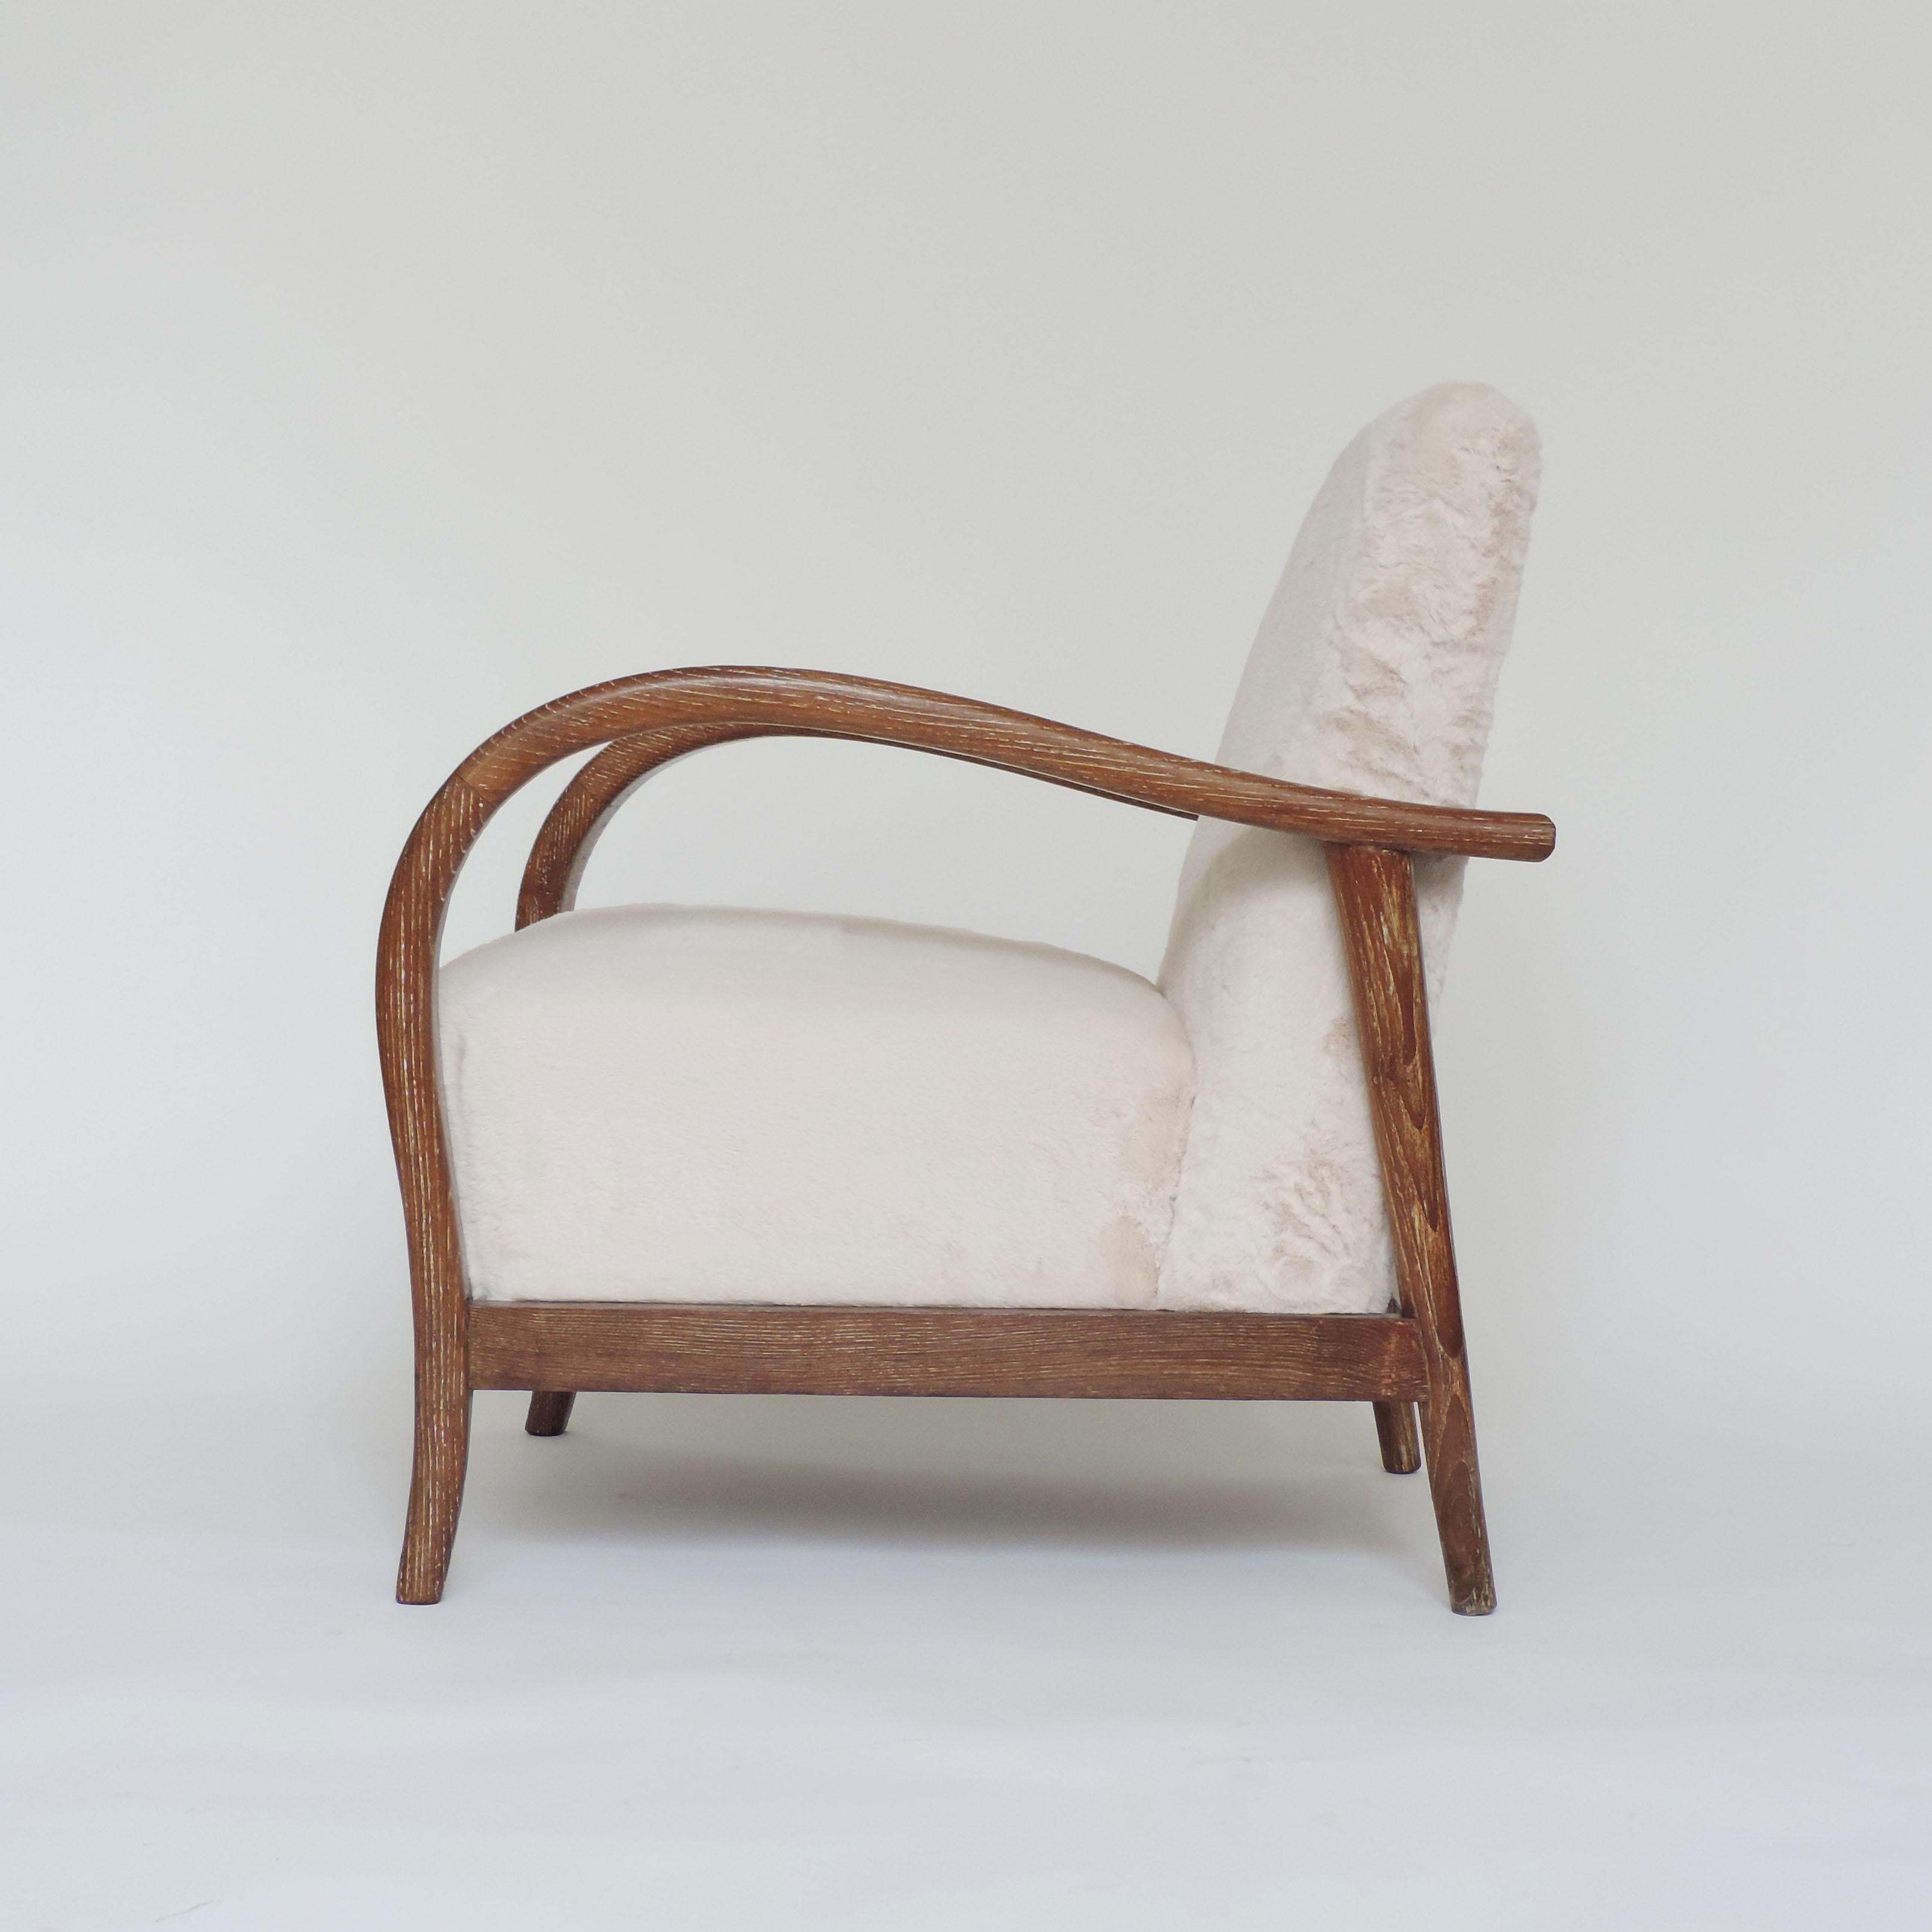 Architect Paolo Buffa pair of 1940s armchairs.